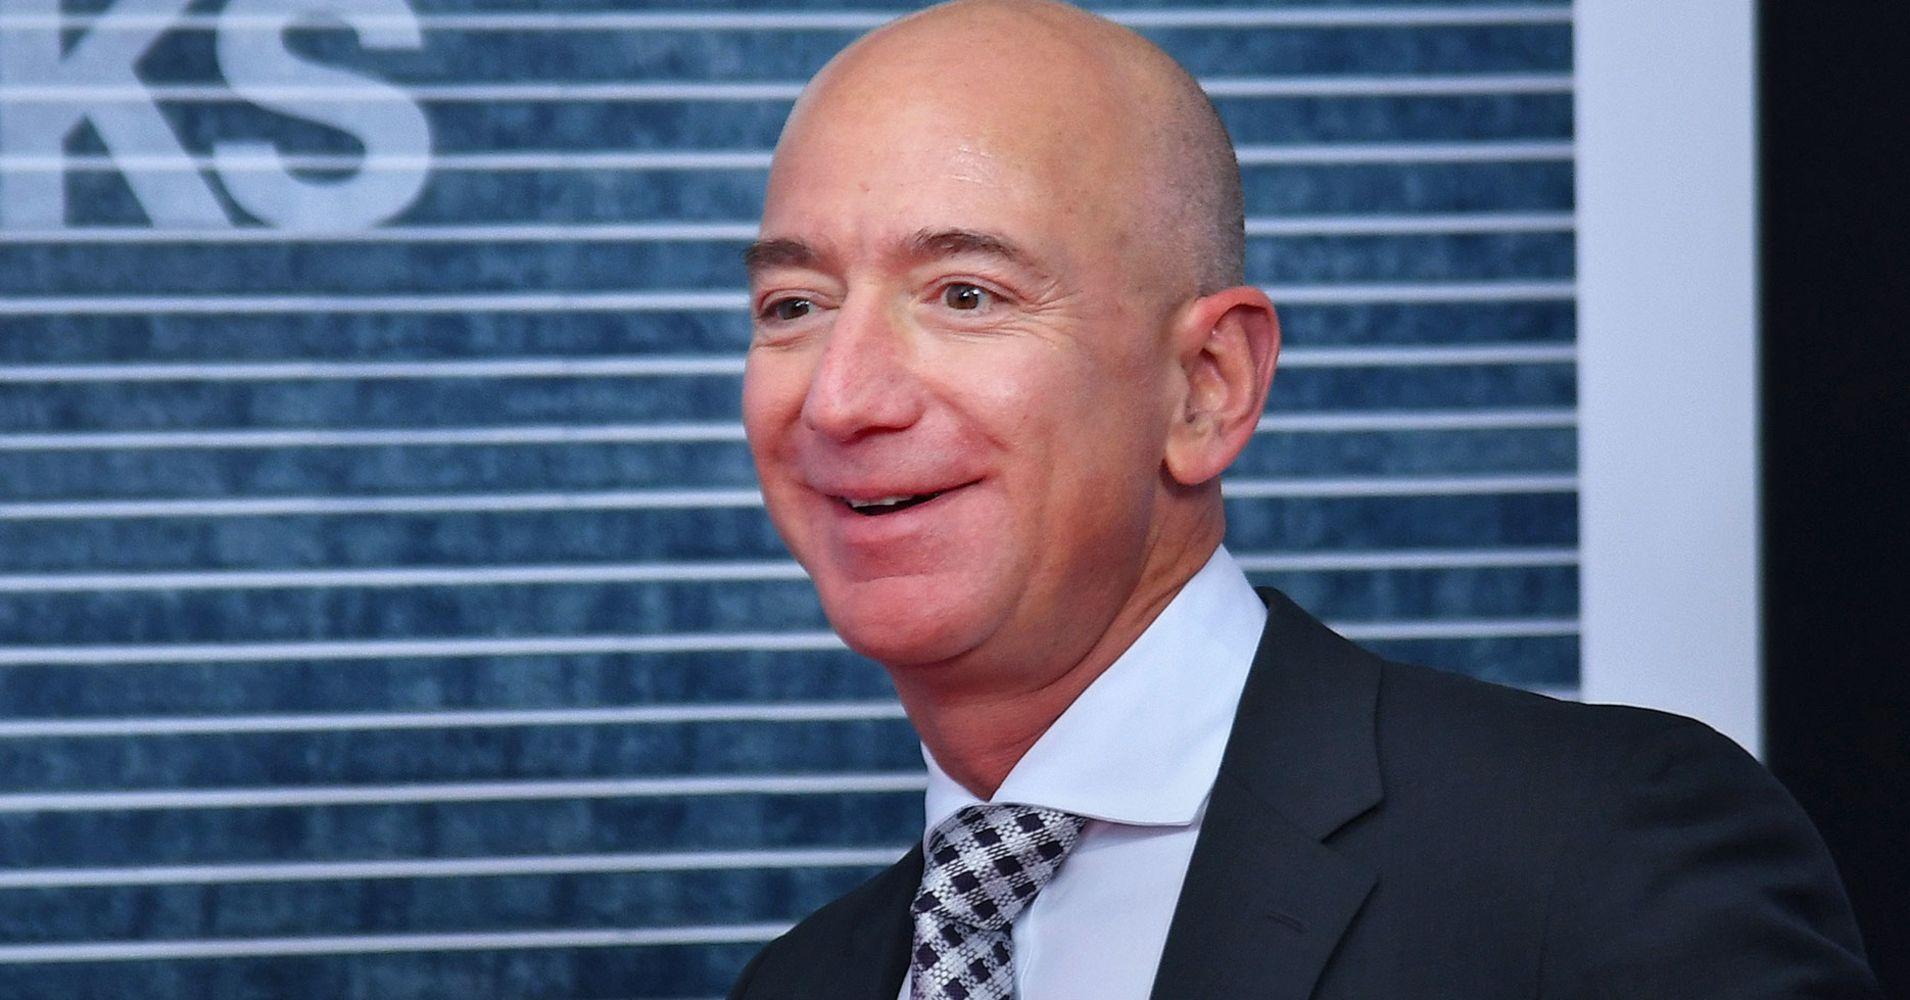 Jeff Bezos' 3 Question Test To Hire Employees